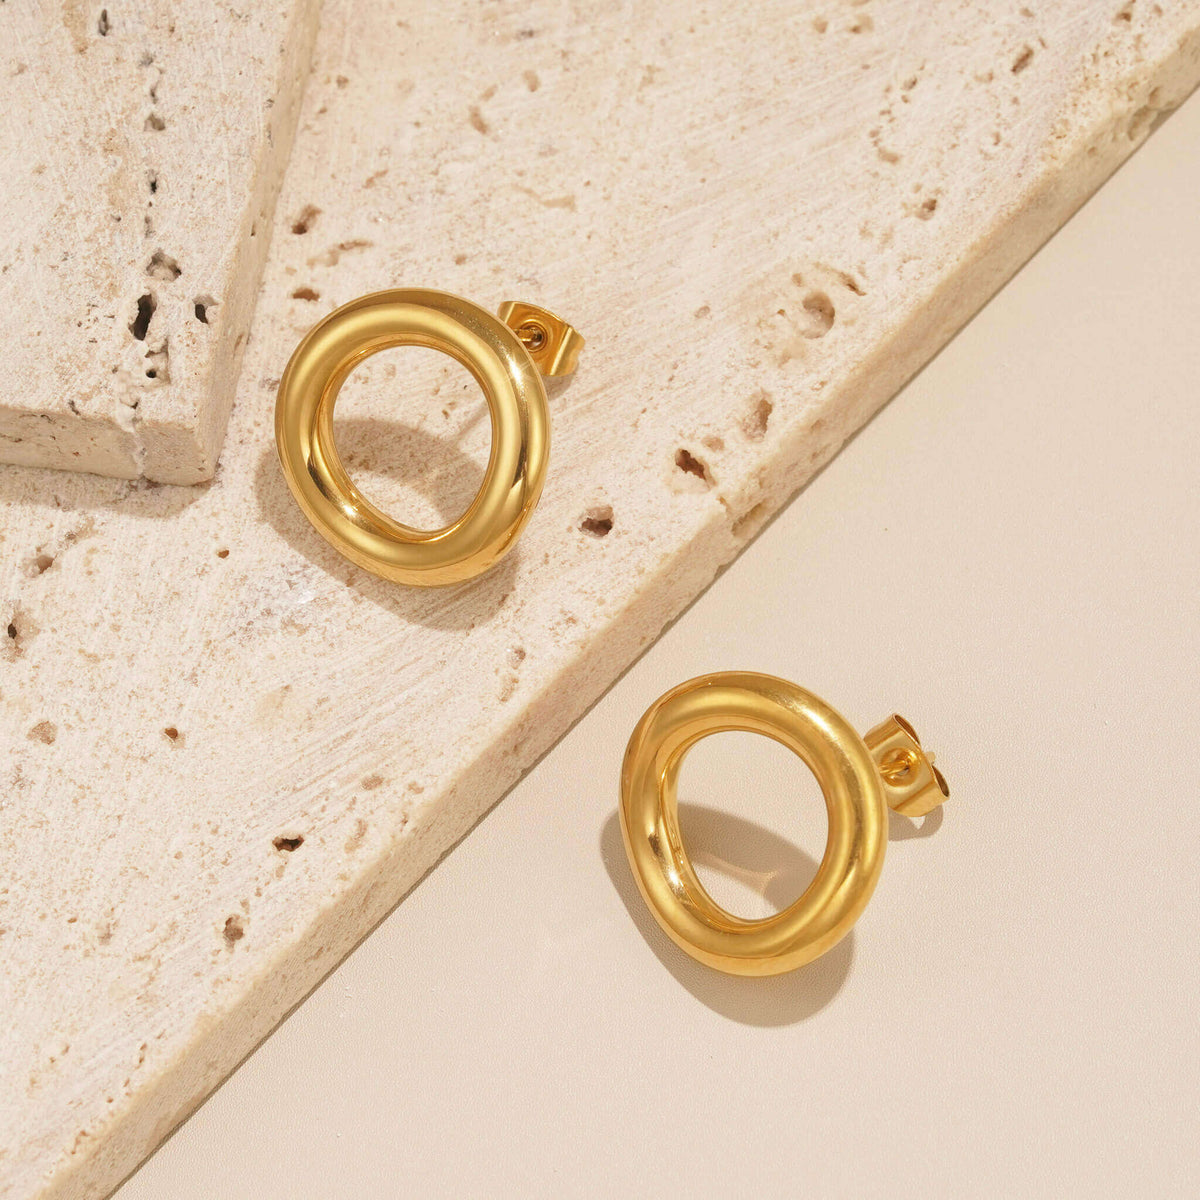 large circle shaped studs that are water resistant and tarnish resistant